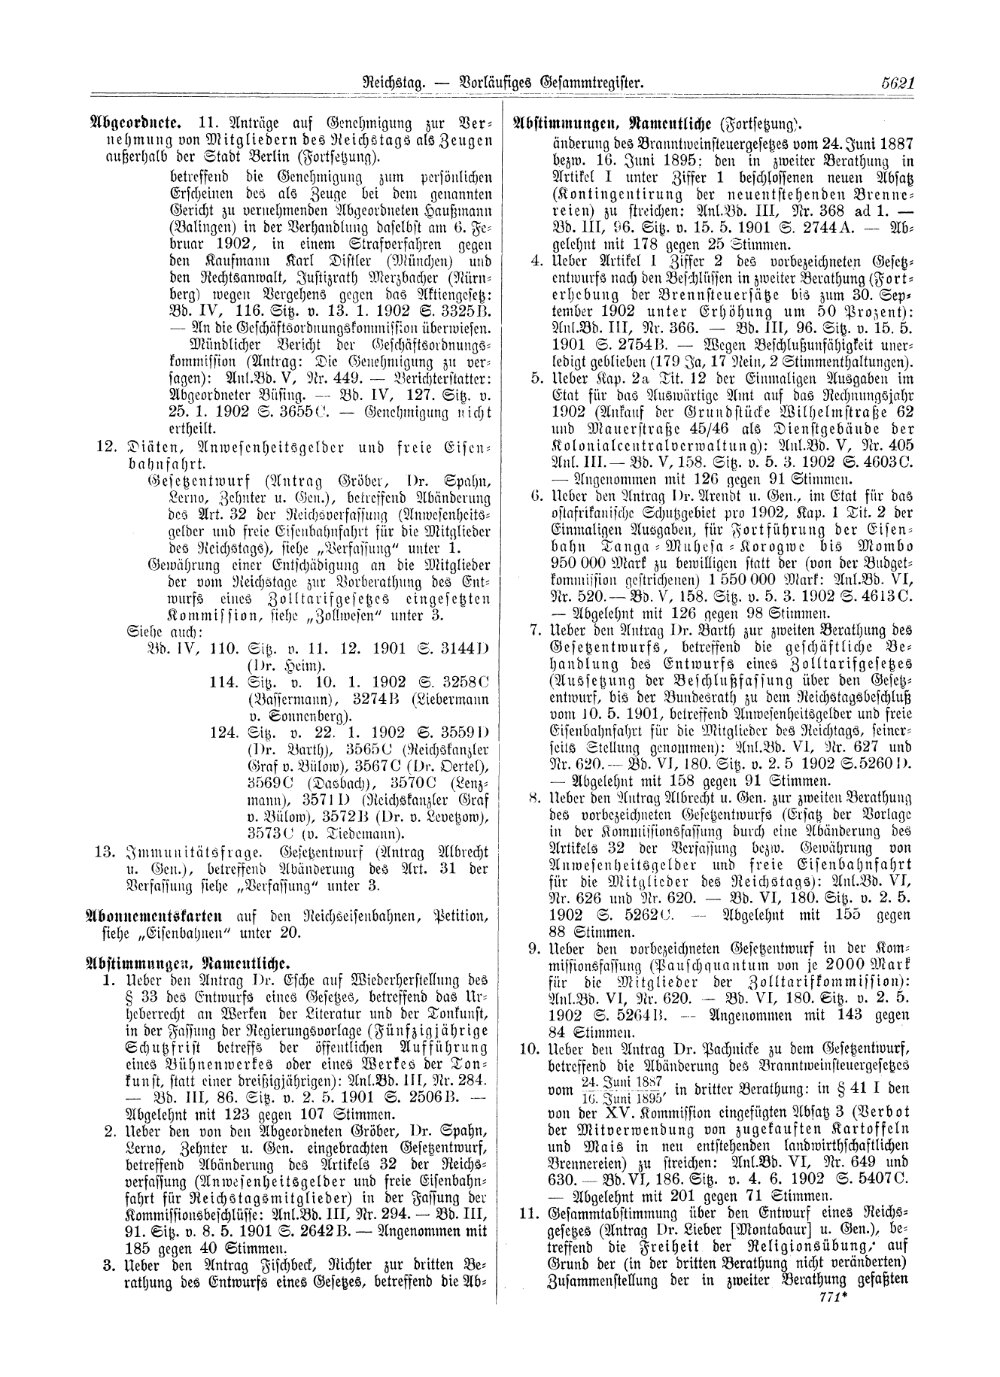 Scan of page 5621